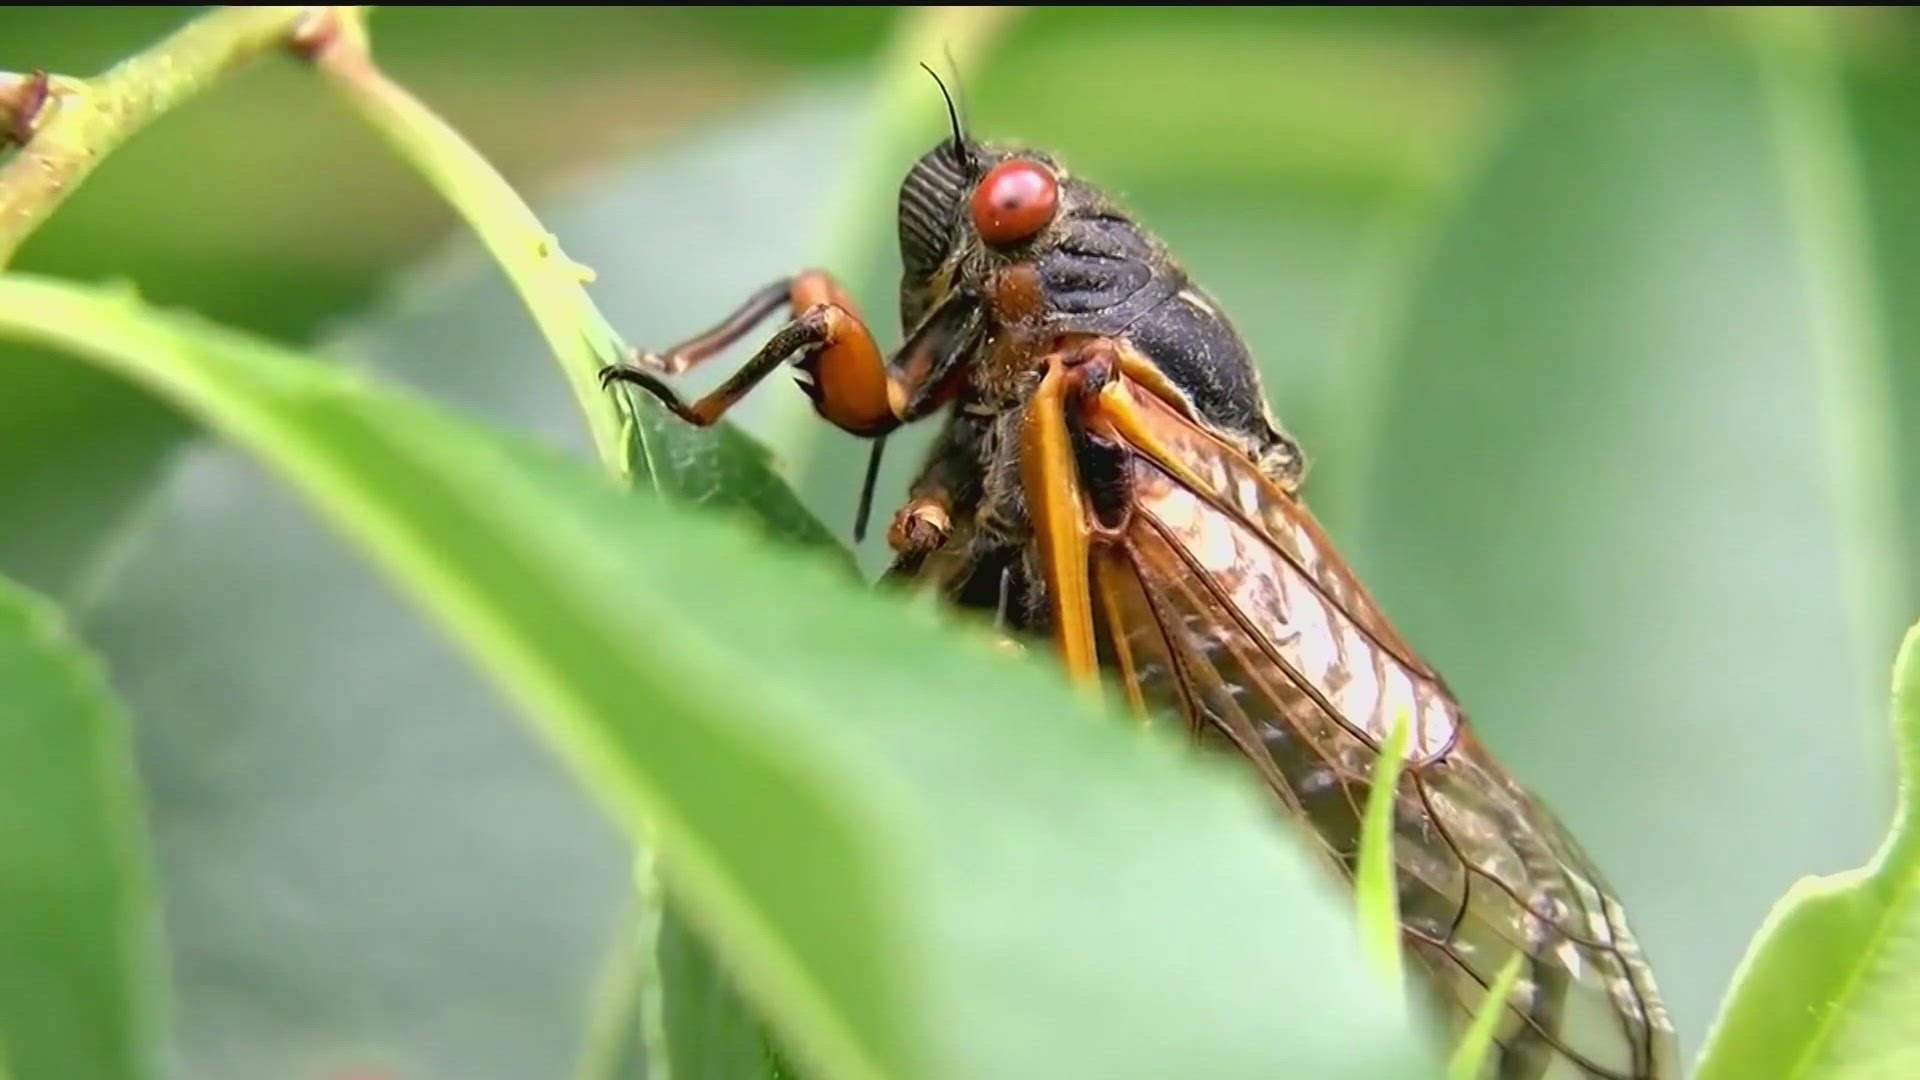 11Alive goes on a cicada safari with a top Georgia entomologist for an update on their life cycle.